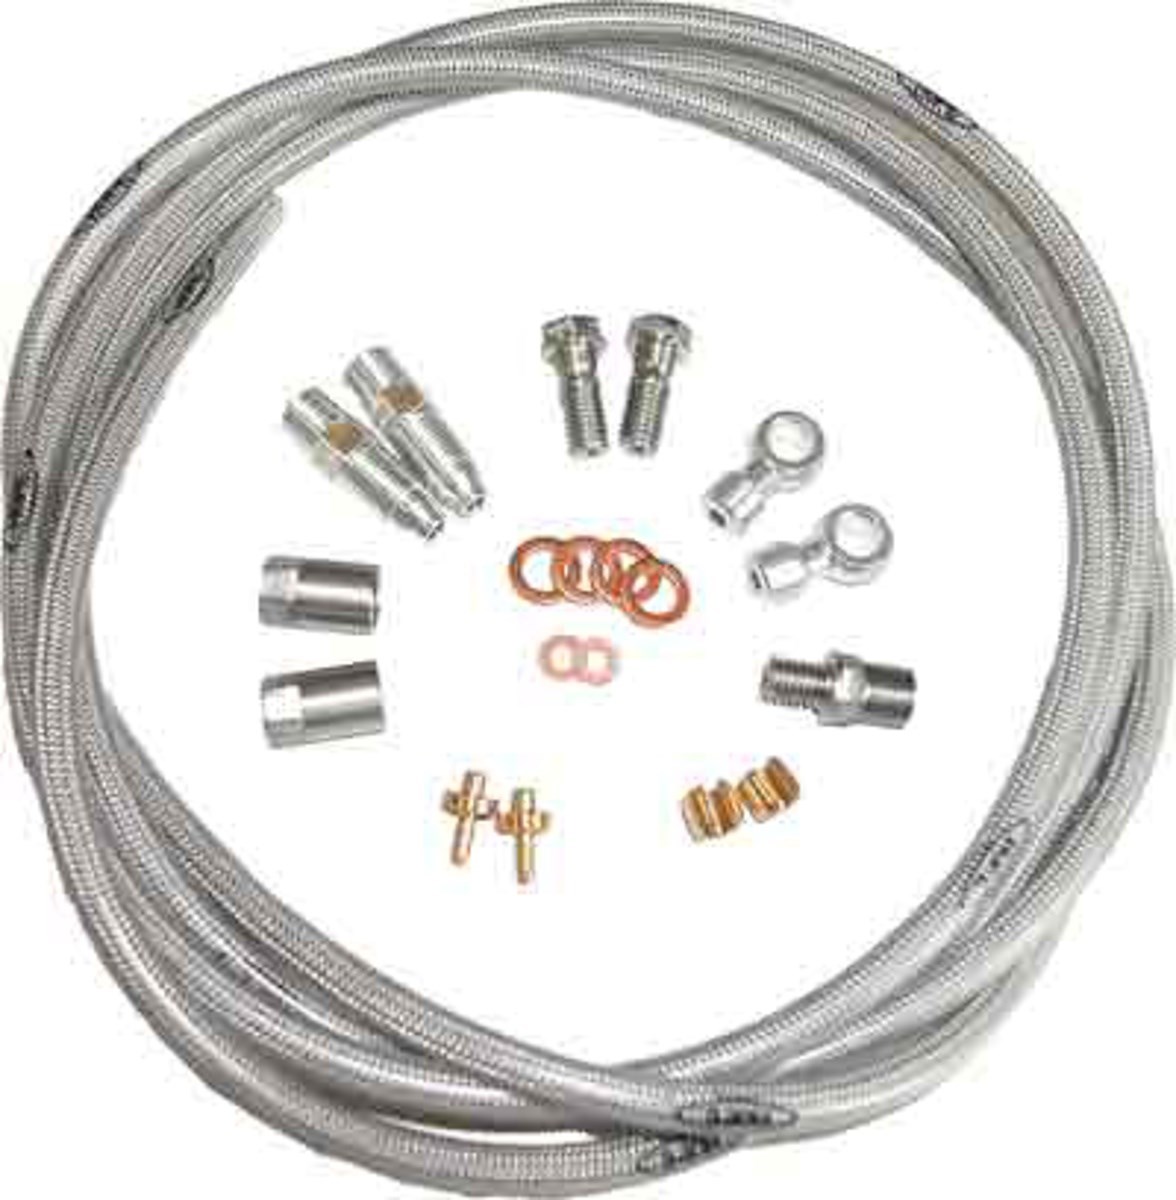 Hope Specific Stainless Steel Braided Hose Kit product image